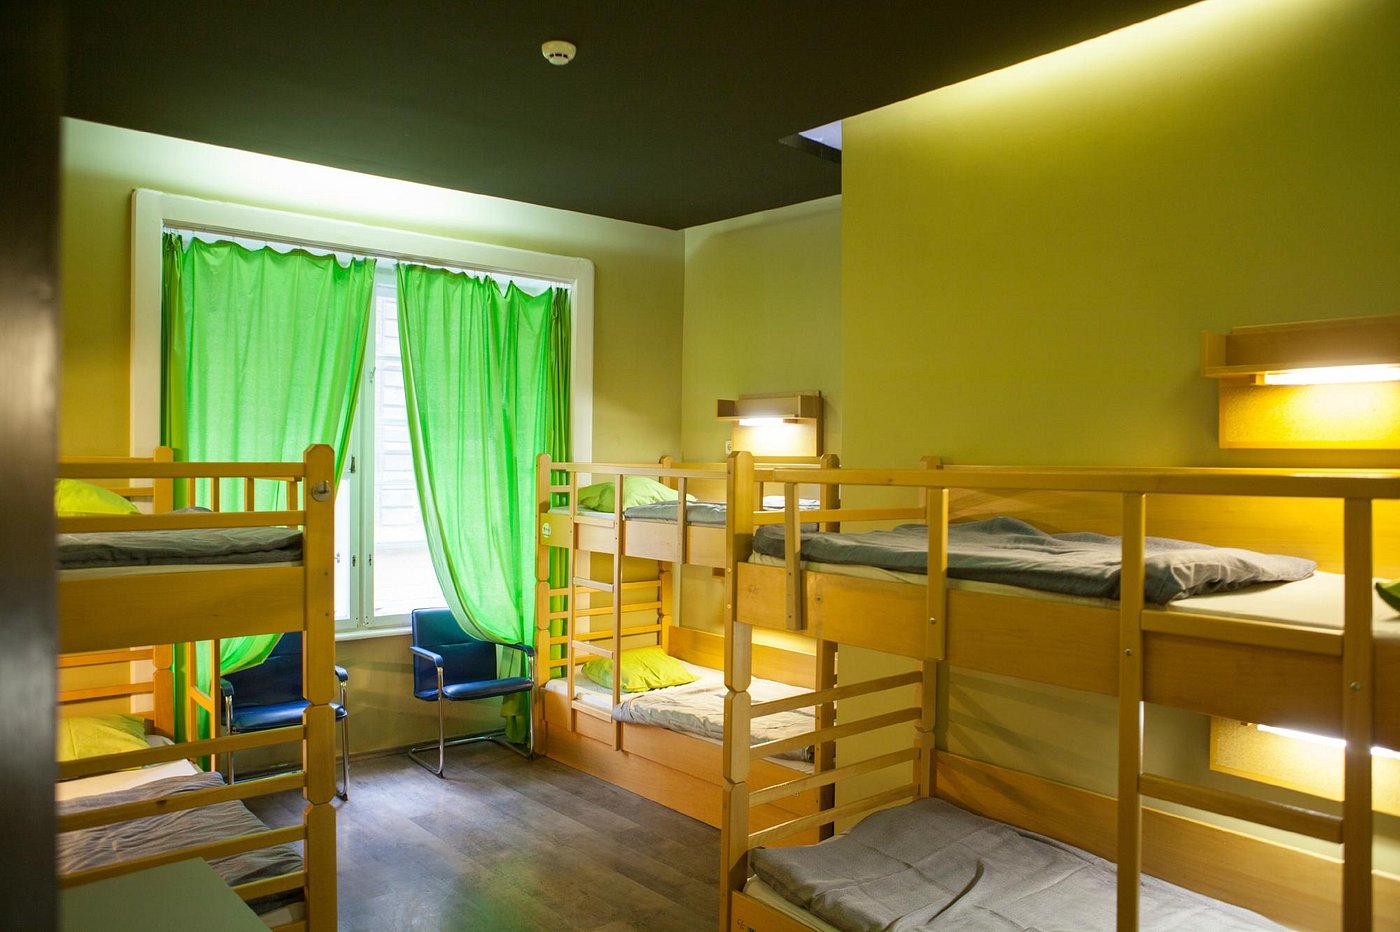 TREESTYLE HOSTEL - Prices & Reviews (Budapest, Hungary)